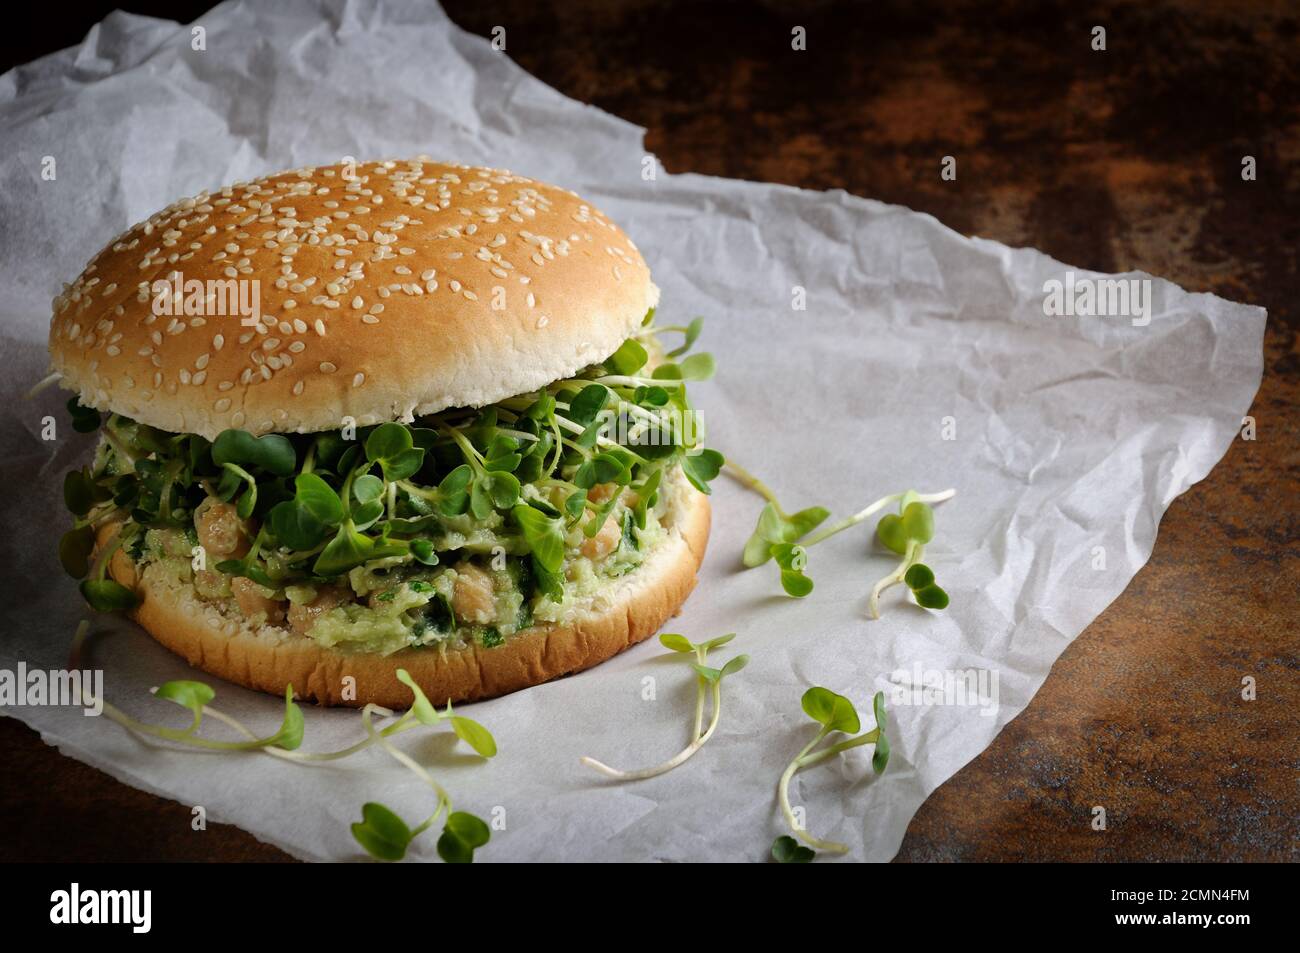 A vegetarian burger made from a gluten-free bun with chickpeas, avocado and herbs, radish sprouts. Stock Photo